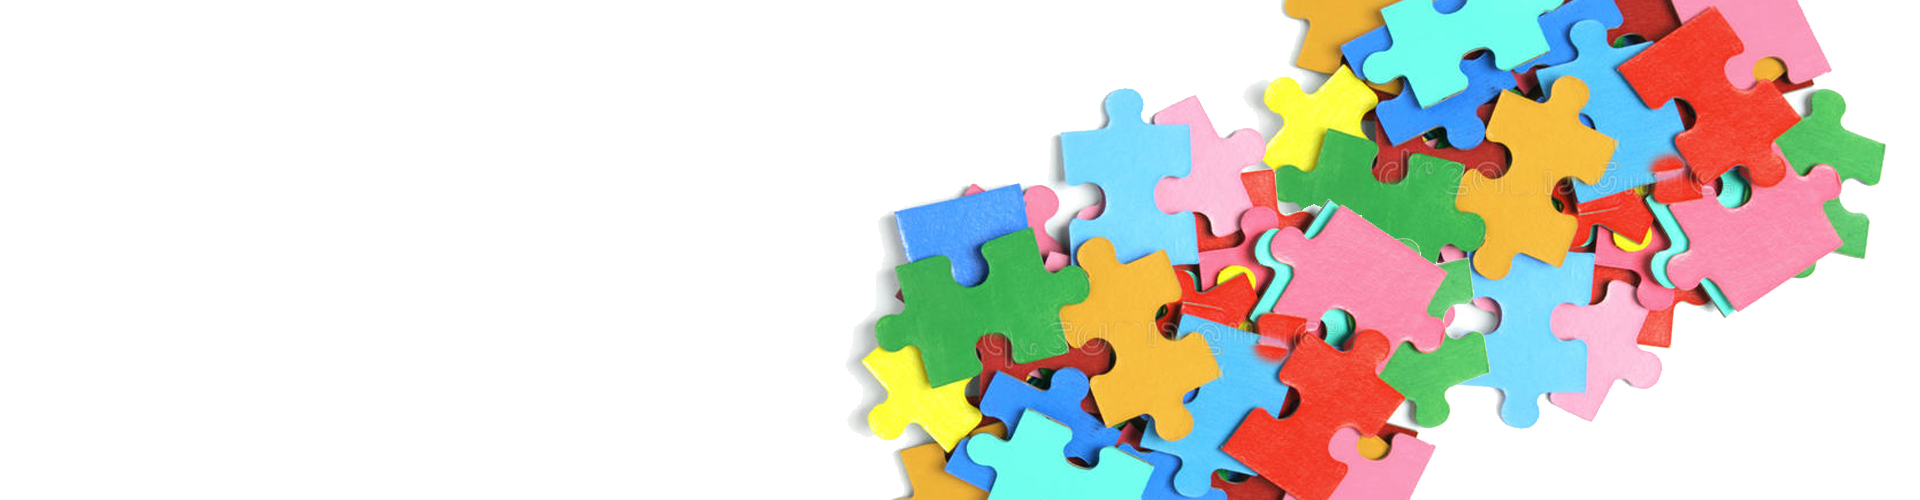 The Cognitive Health Benefits of Jigsaw Puzzling by C.F.